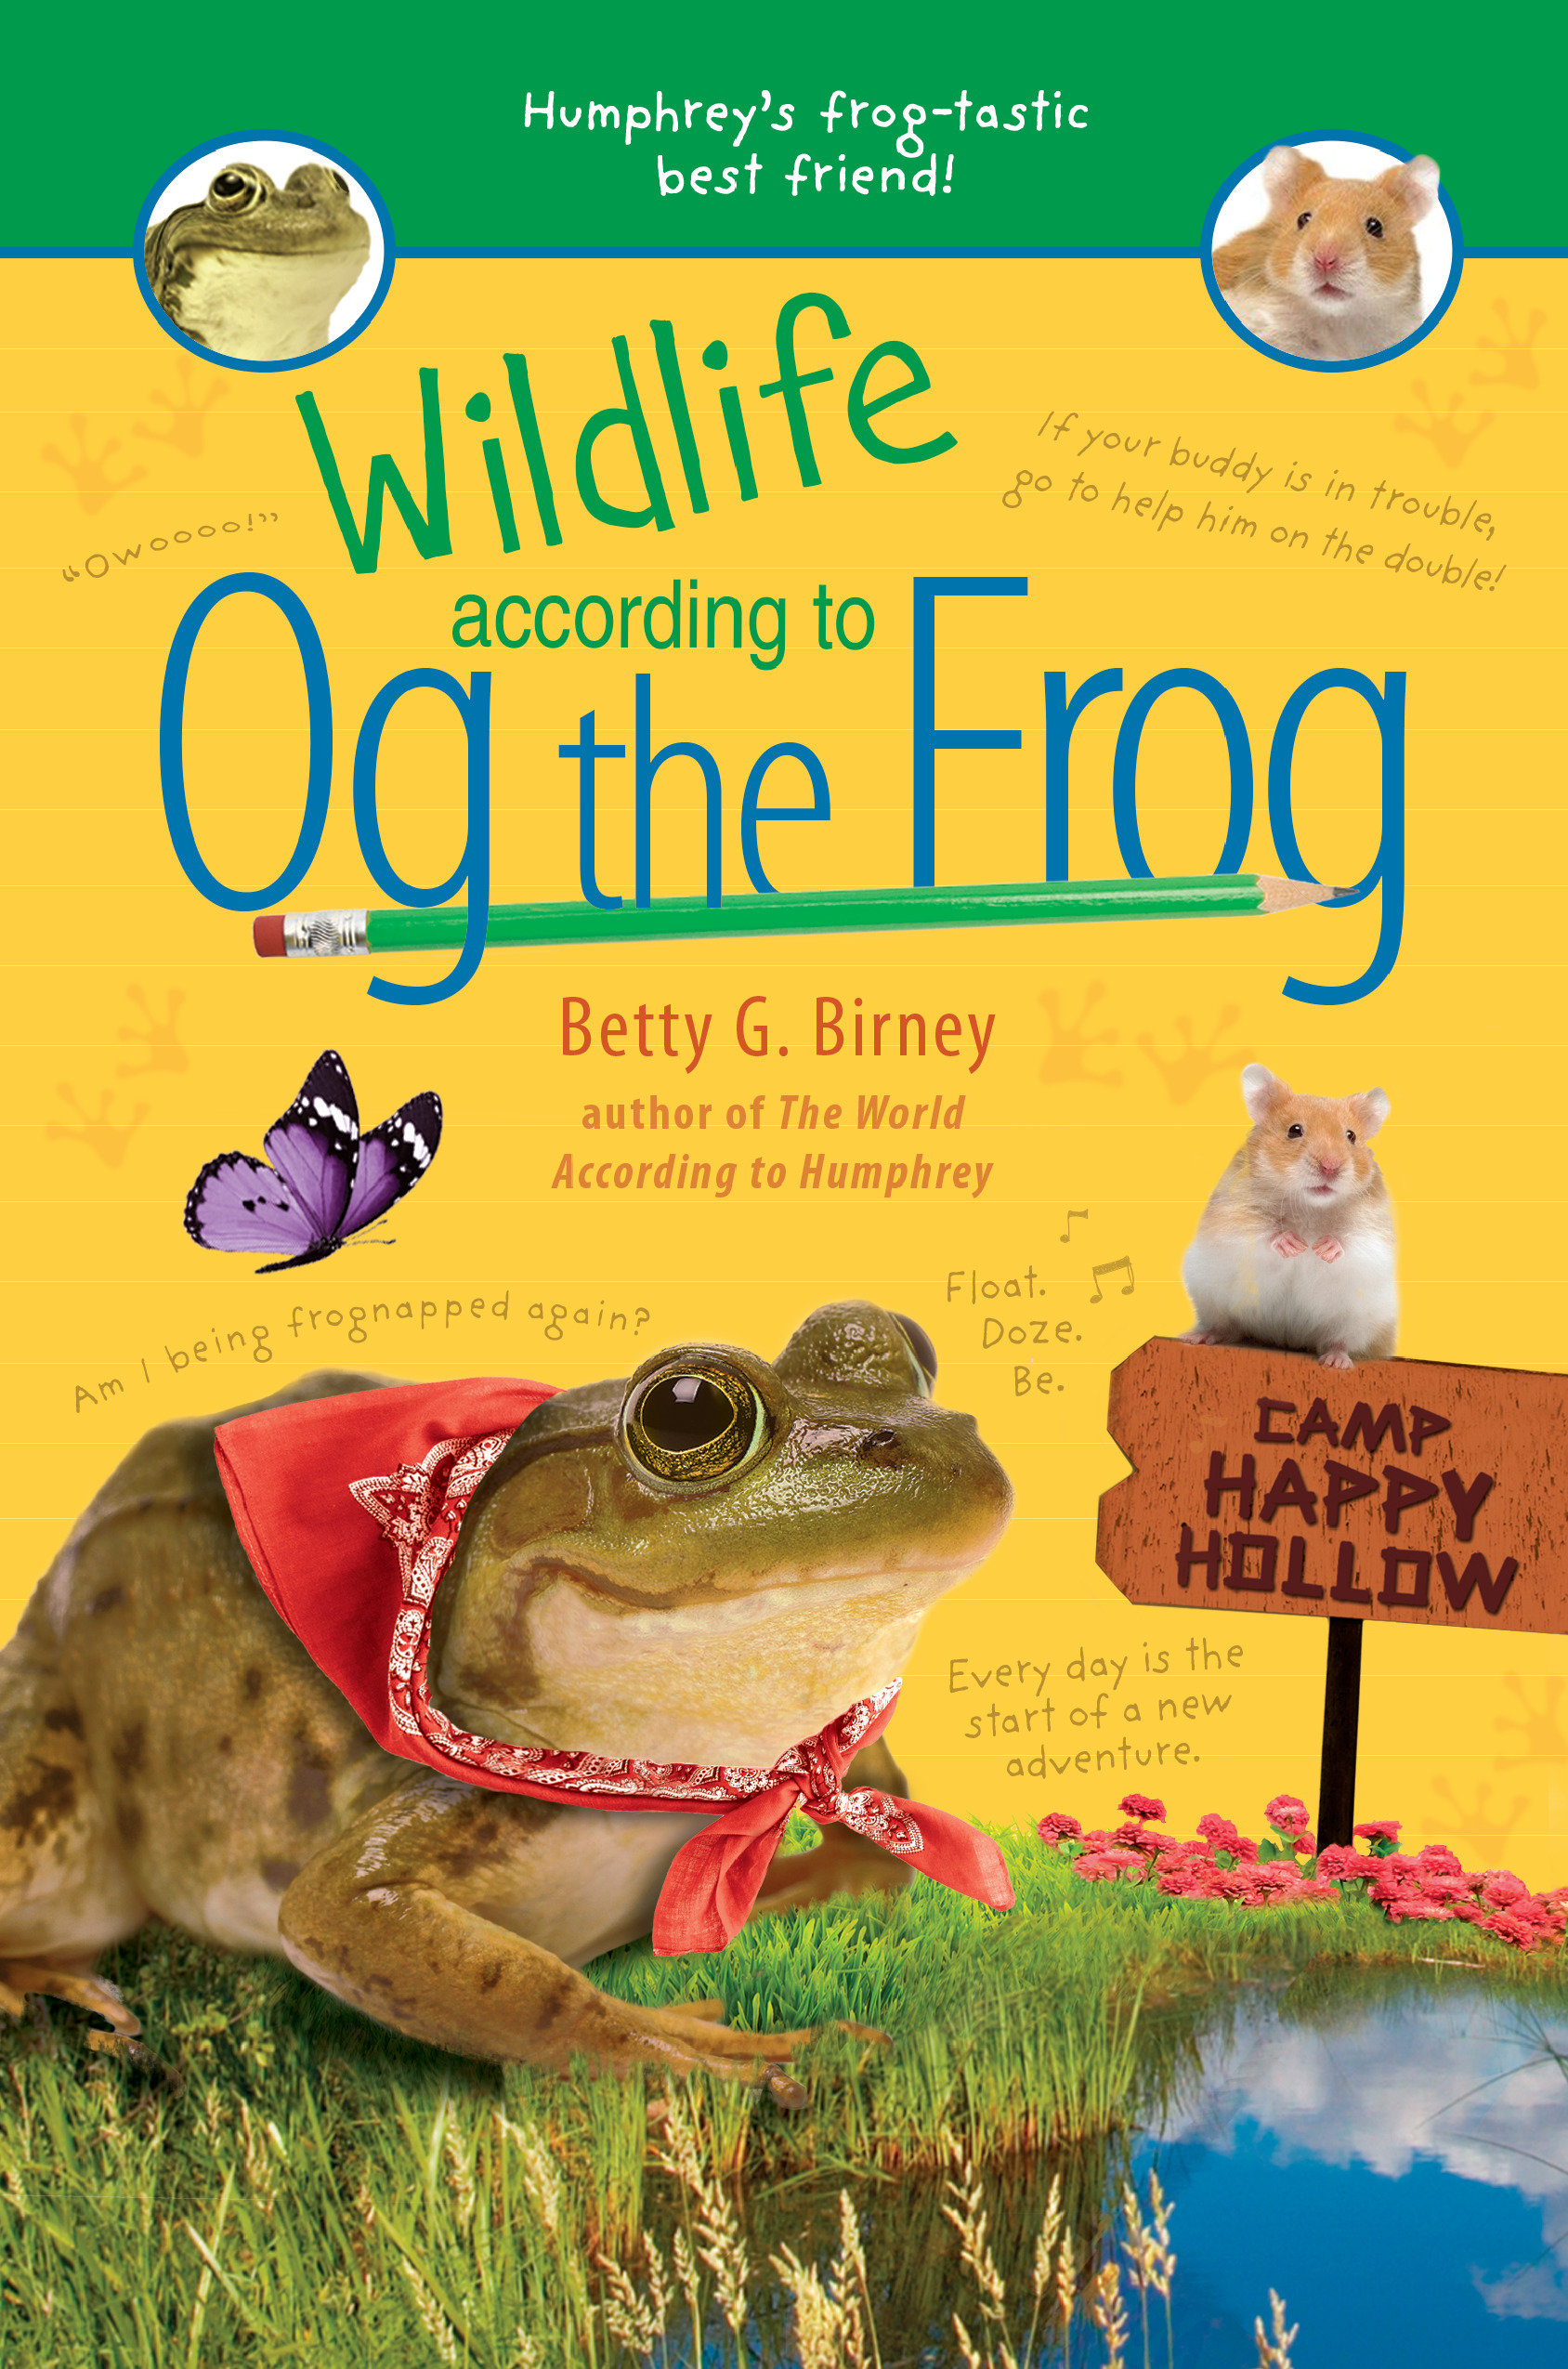 Wildlife According To Og The Frog (Hardcover Book)